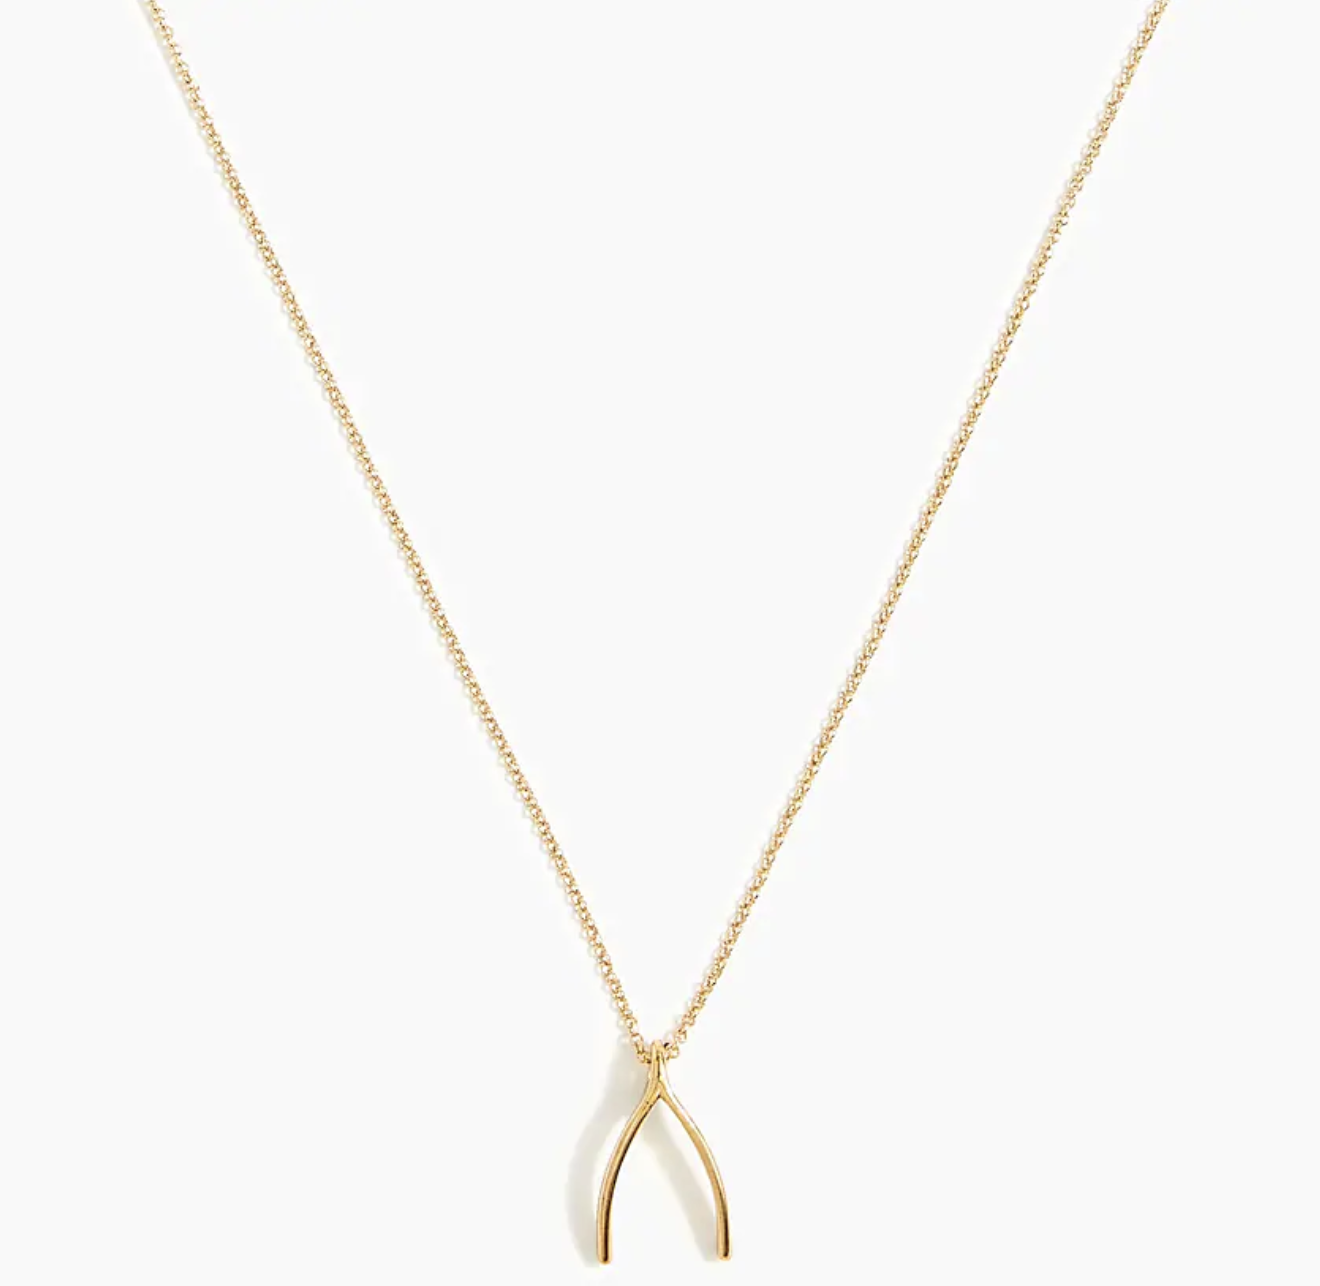 the gold tone necklace